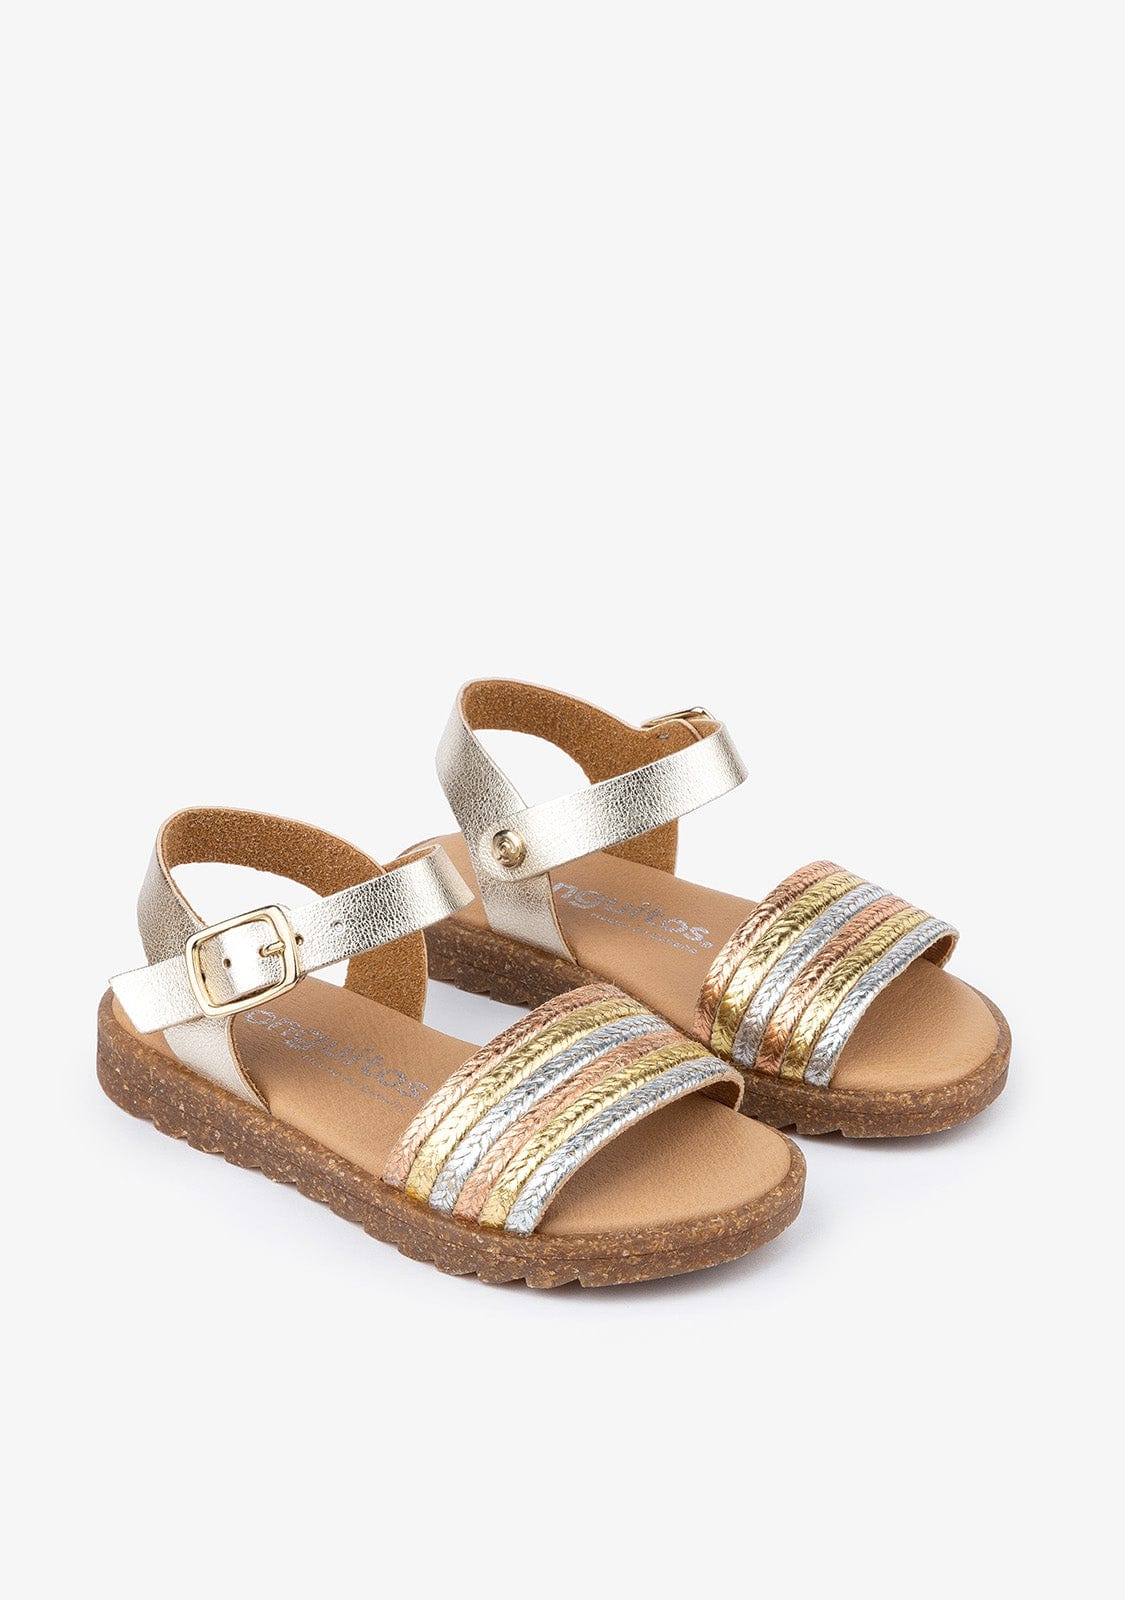 CONGUITOS Shoes Girl's Multicolor Metallized Sandals Leather